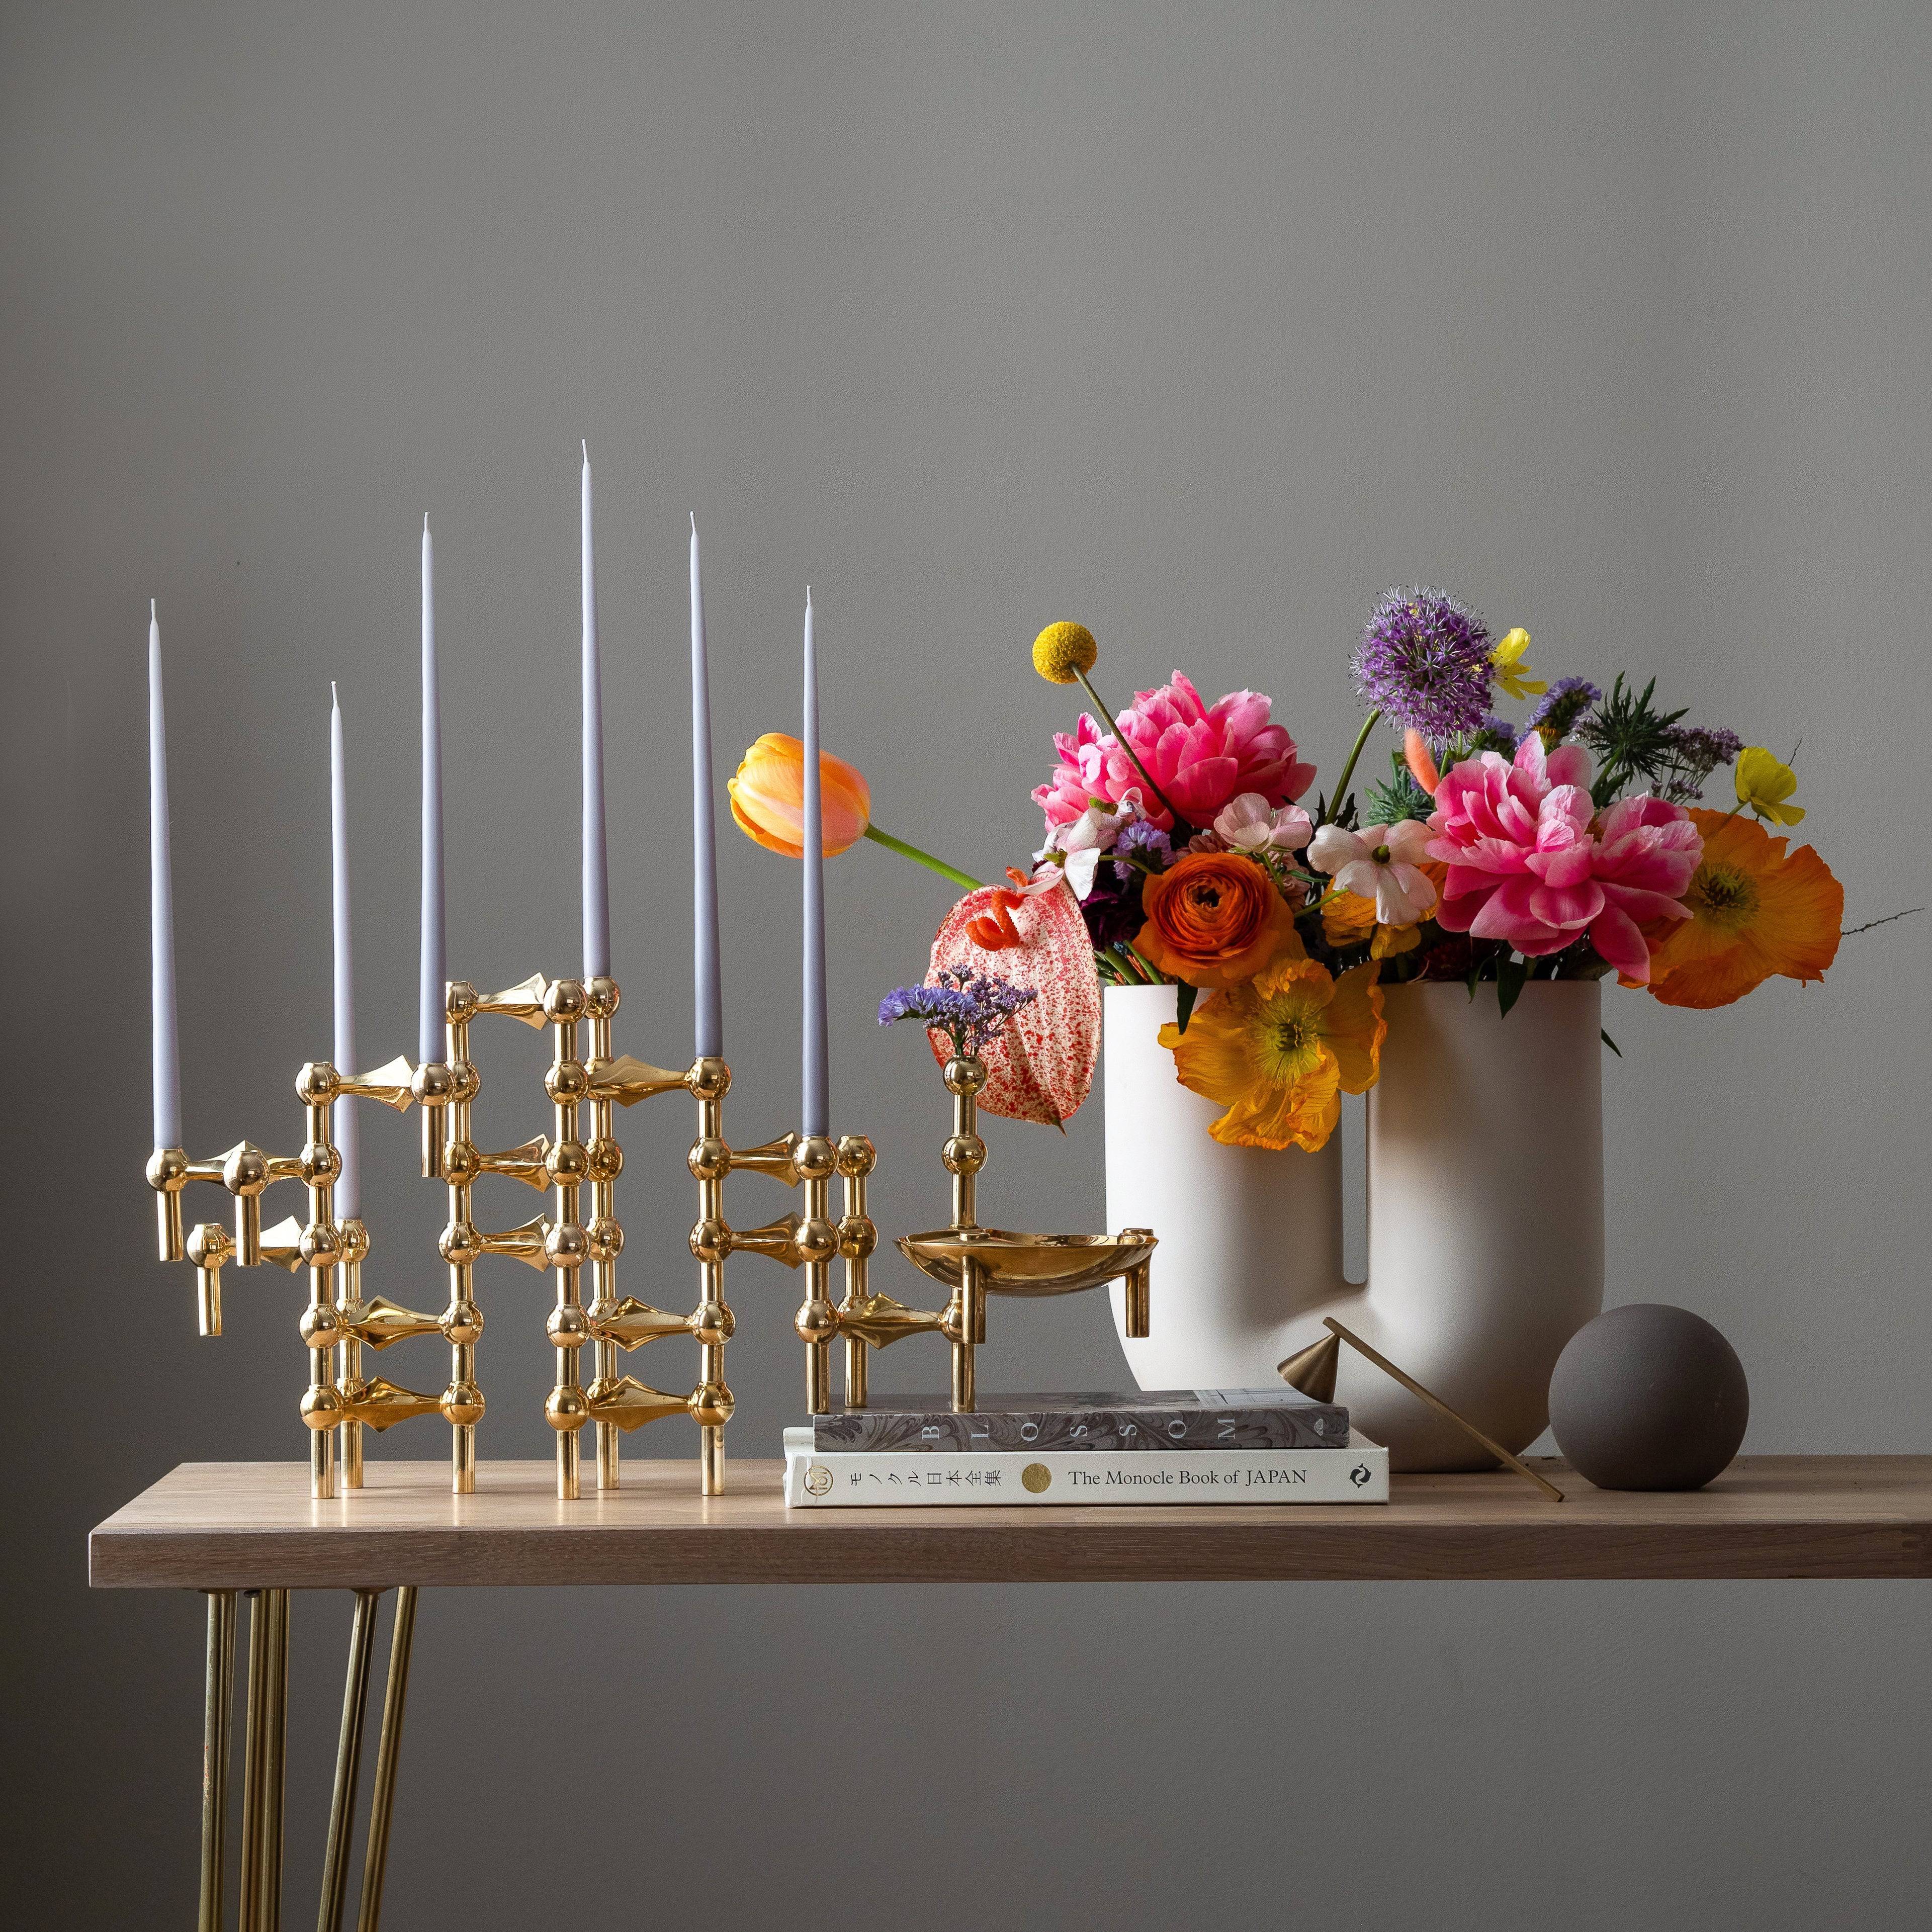 Modular Candle Holder - Solid Brass - THAT COOL LIVING